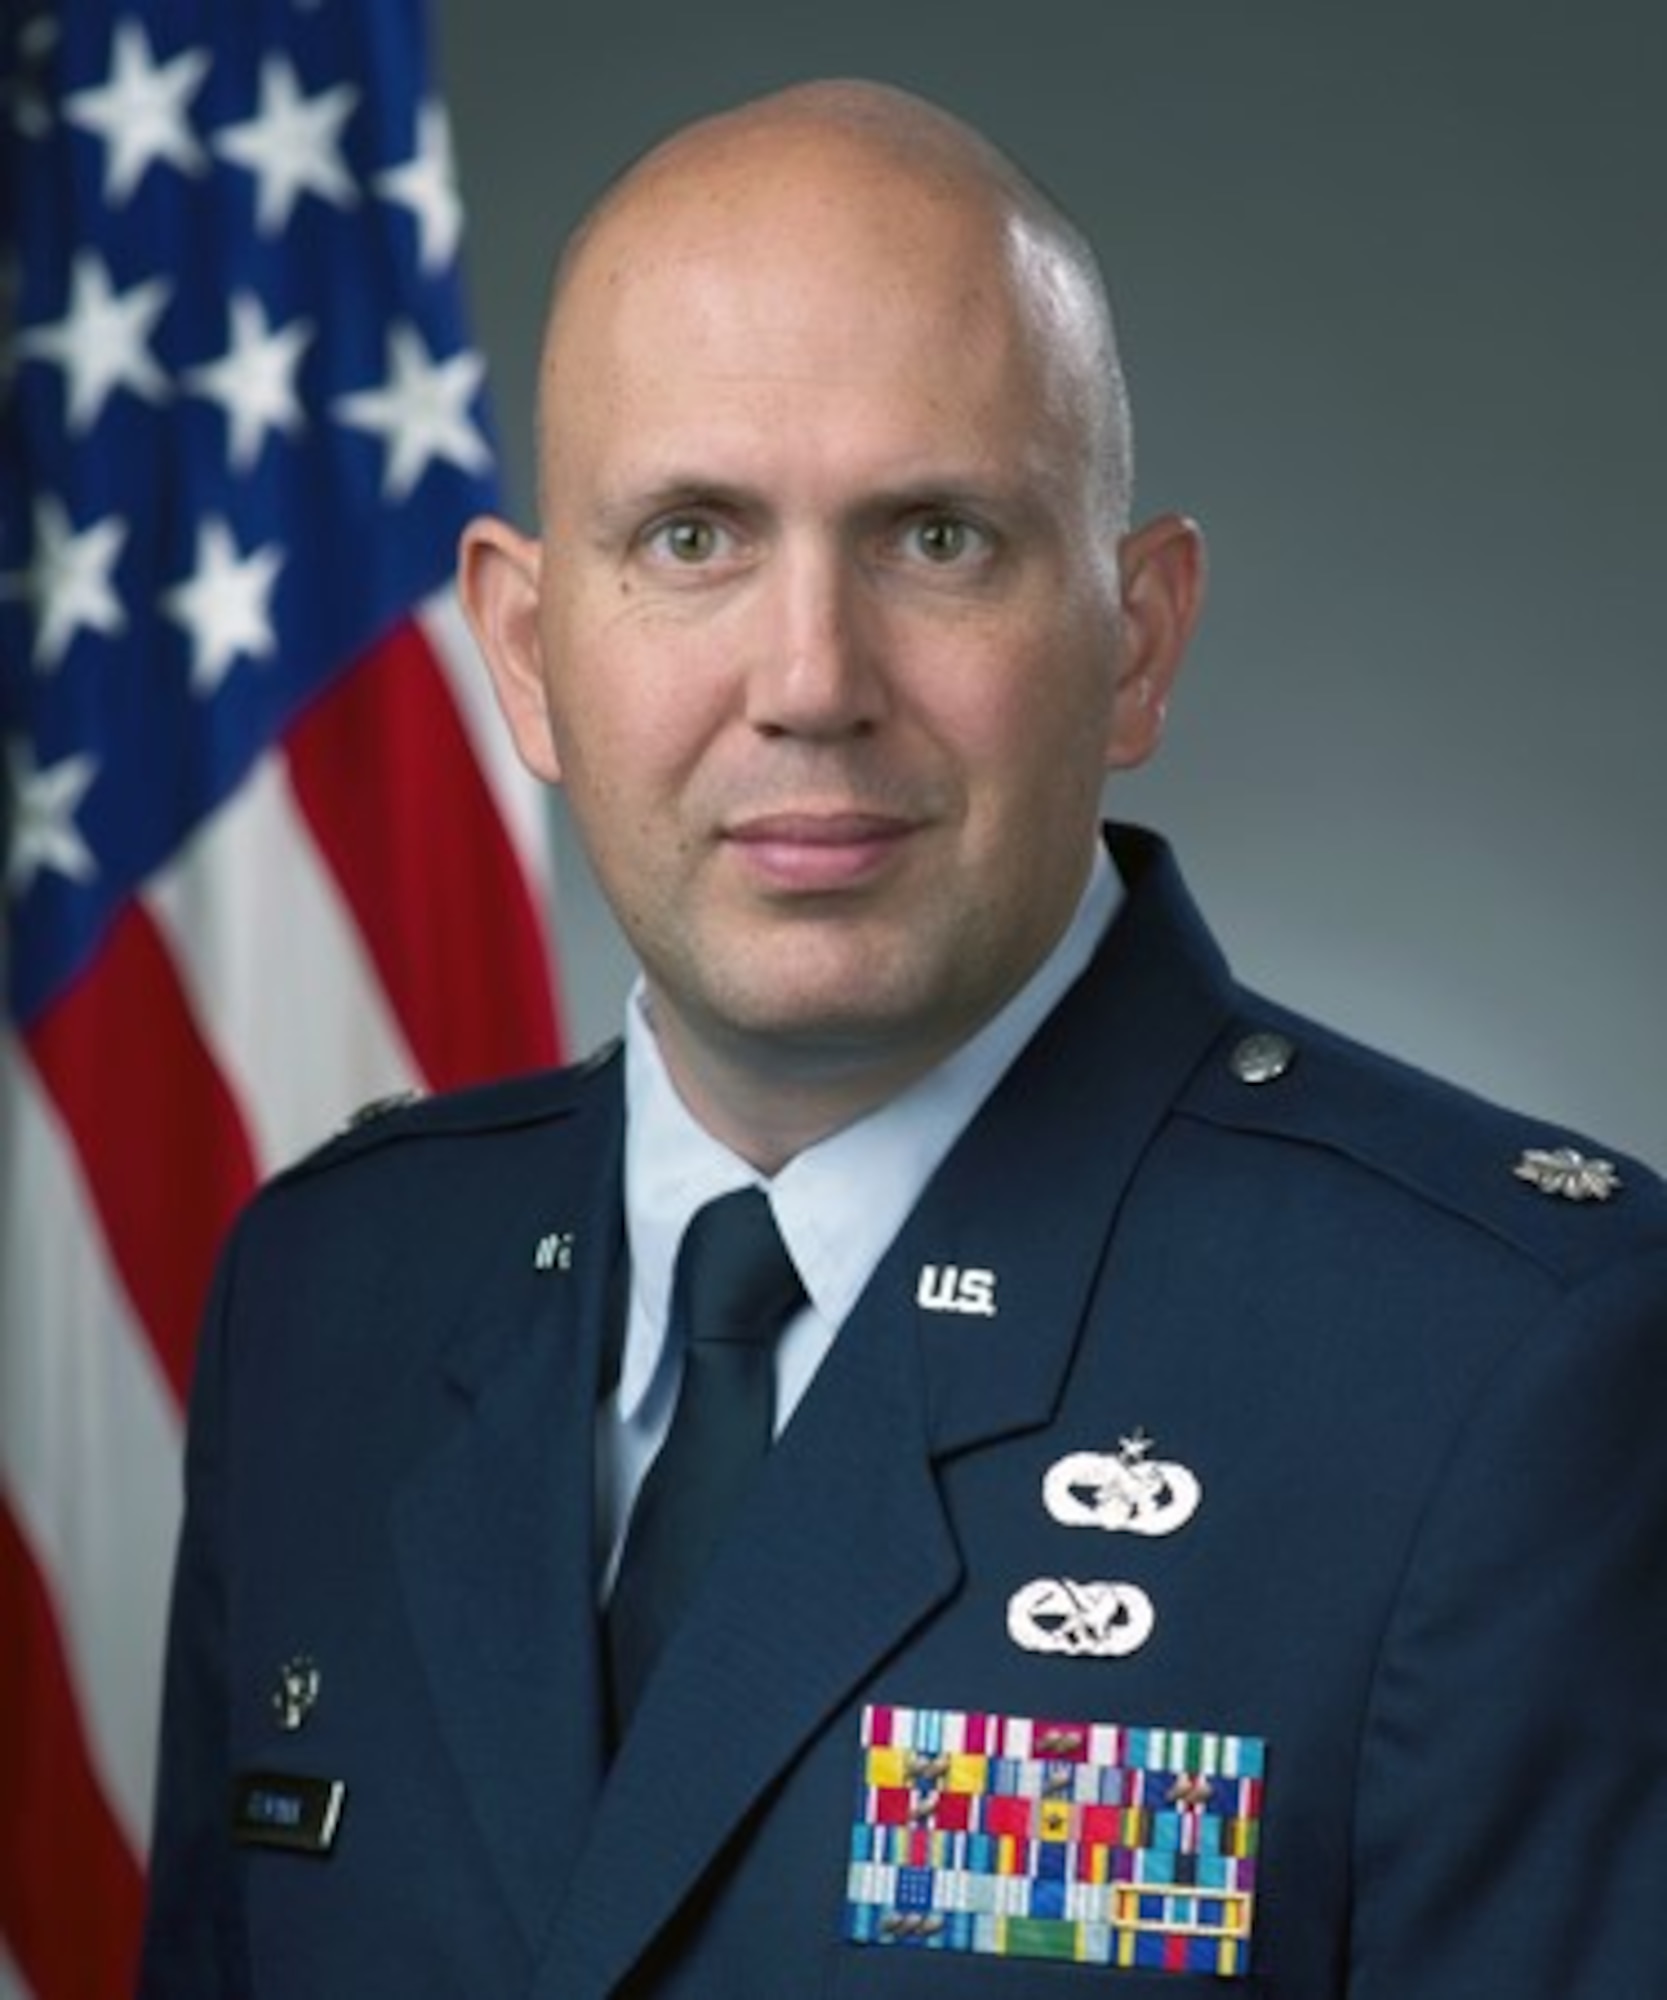 Lt. Col. Michael Tiemann, 60th Air Mobility Wing director of staff, poses for his official photo. (Courtesy photo)